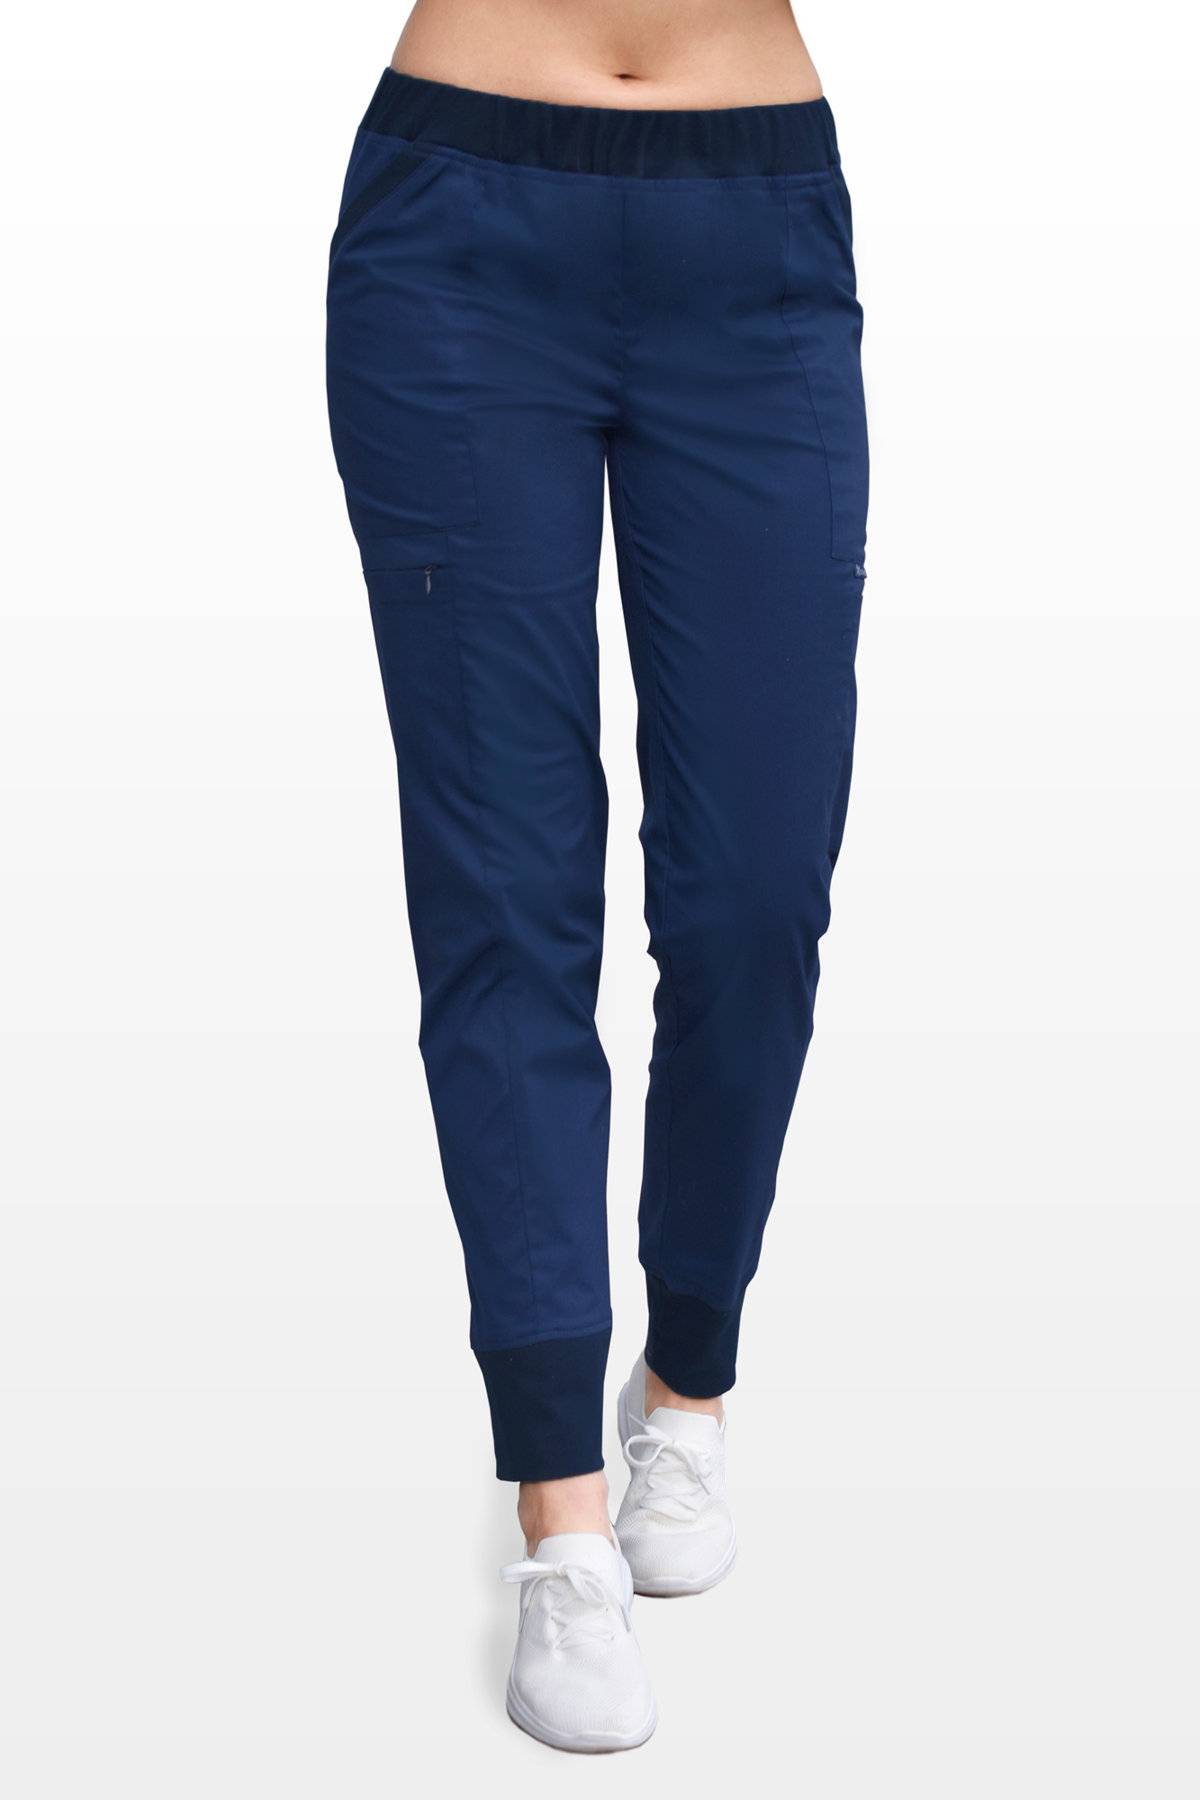 Scrubs pants with | COLORMED a STRETCH, navy Medical lime, clothes stripe, + blue SOFT SE4-G2